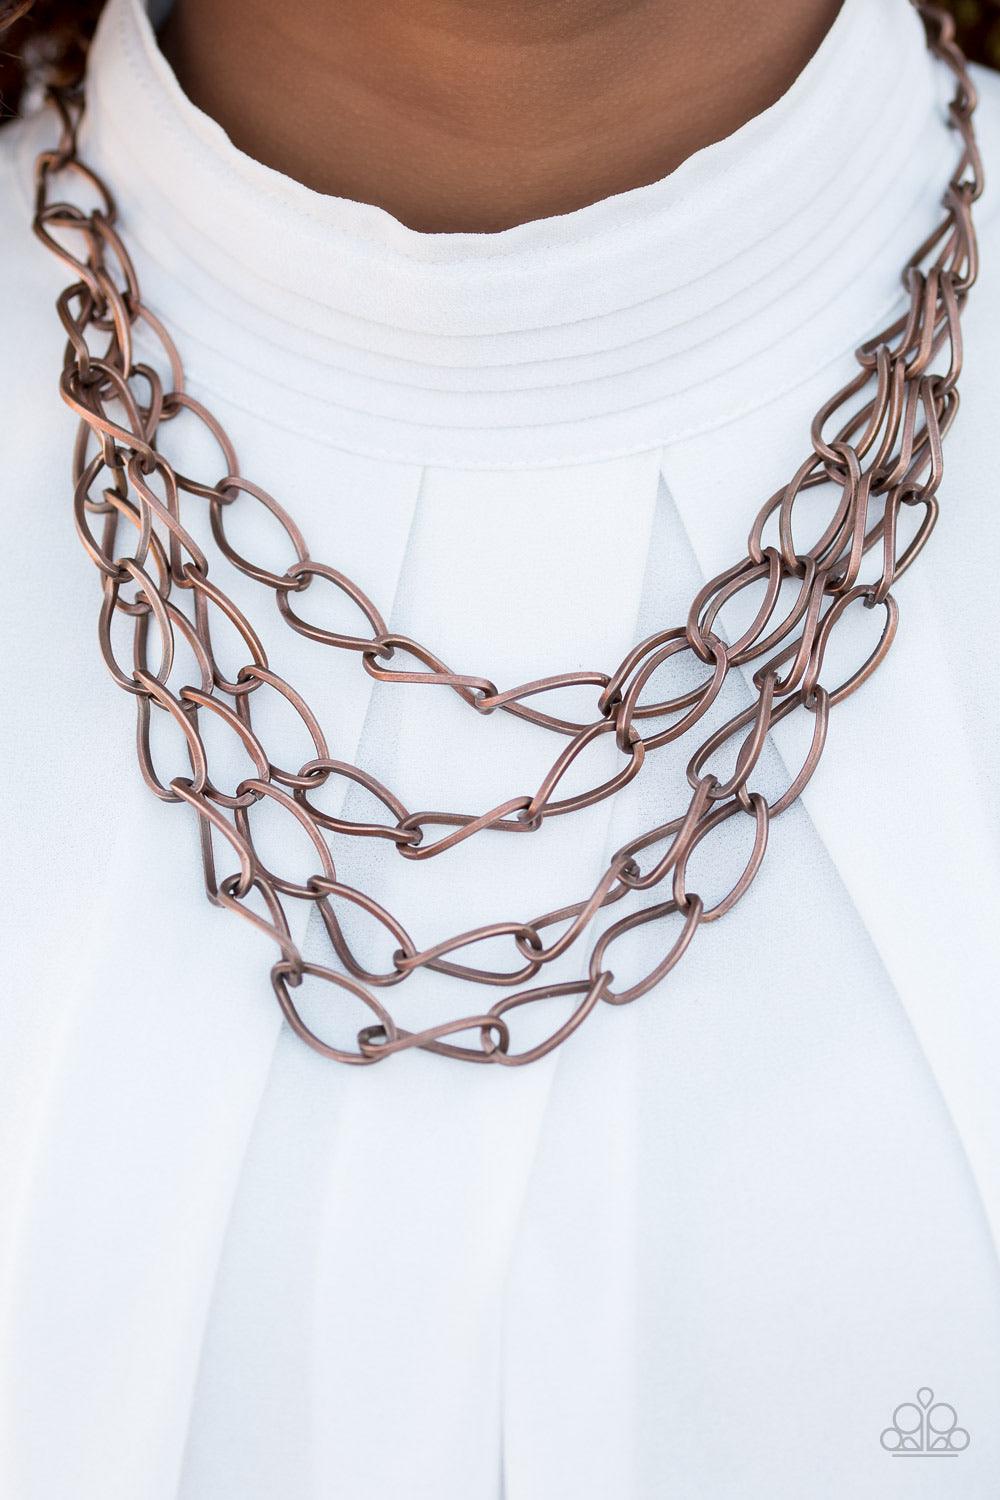 Chain Reaction ~Copper - Beautifully Blinged